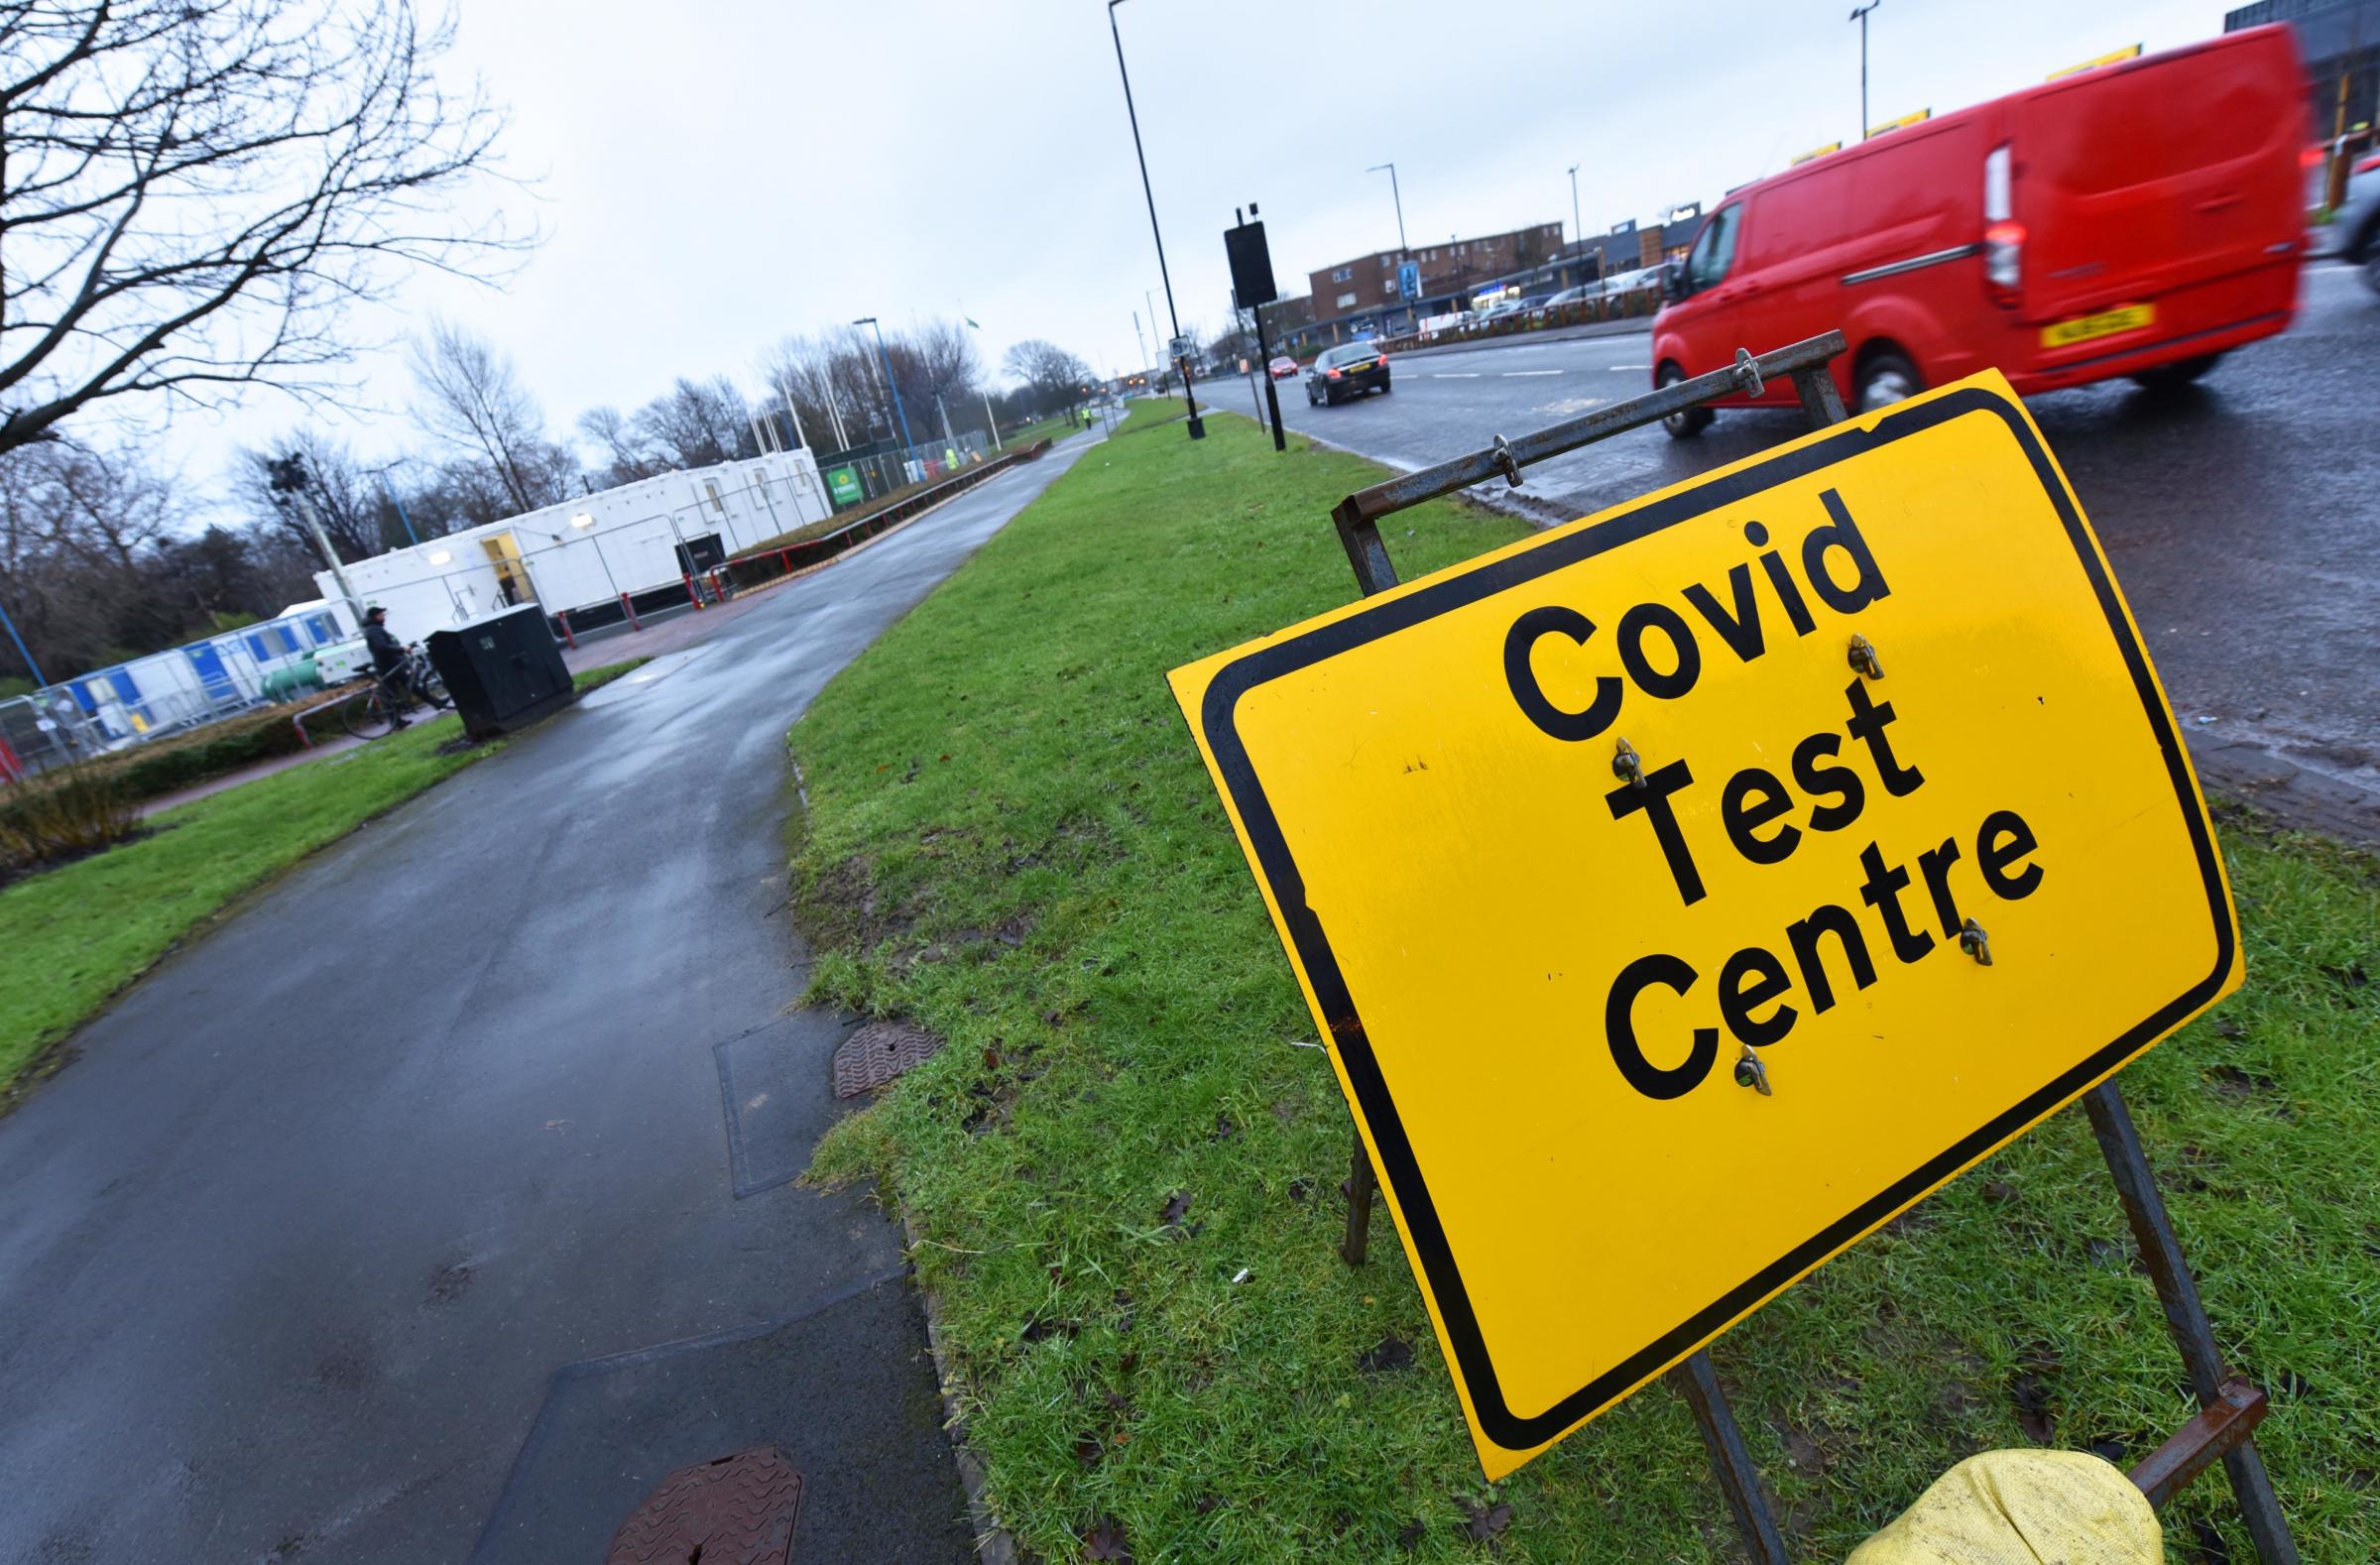 New walk-through Covid test site opens